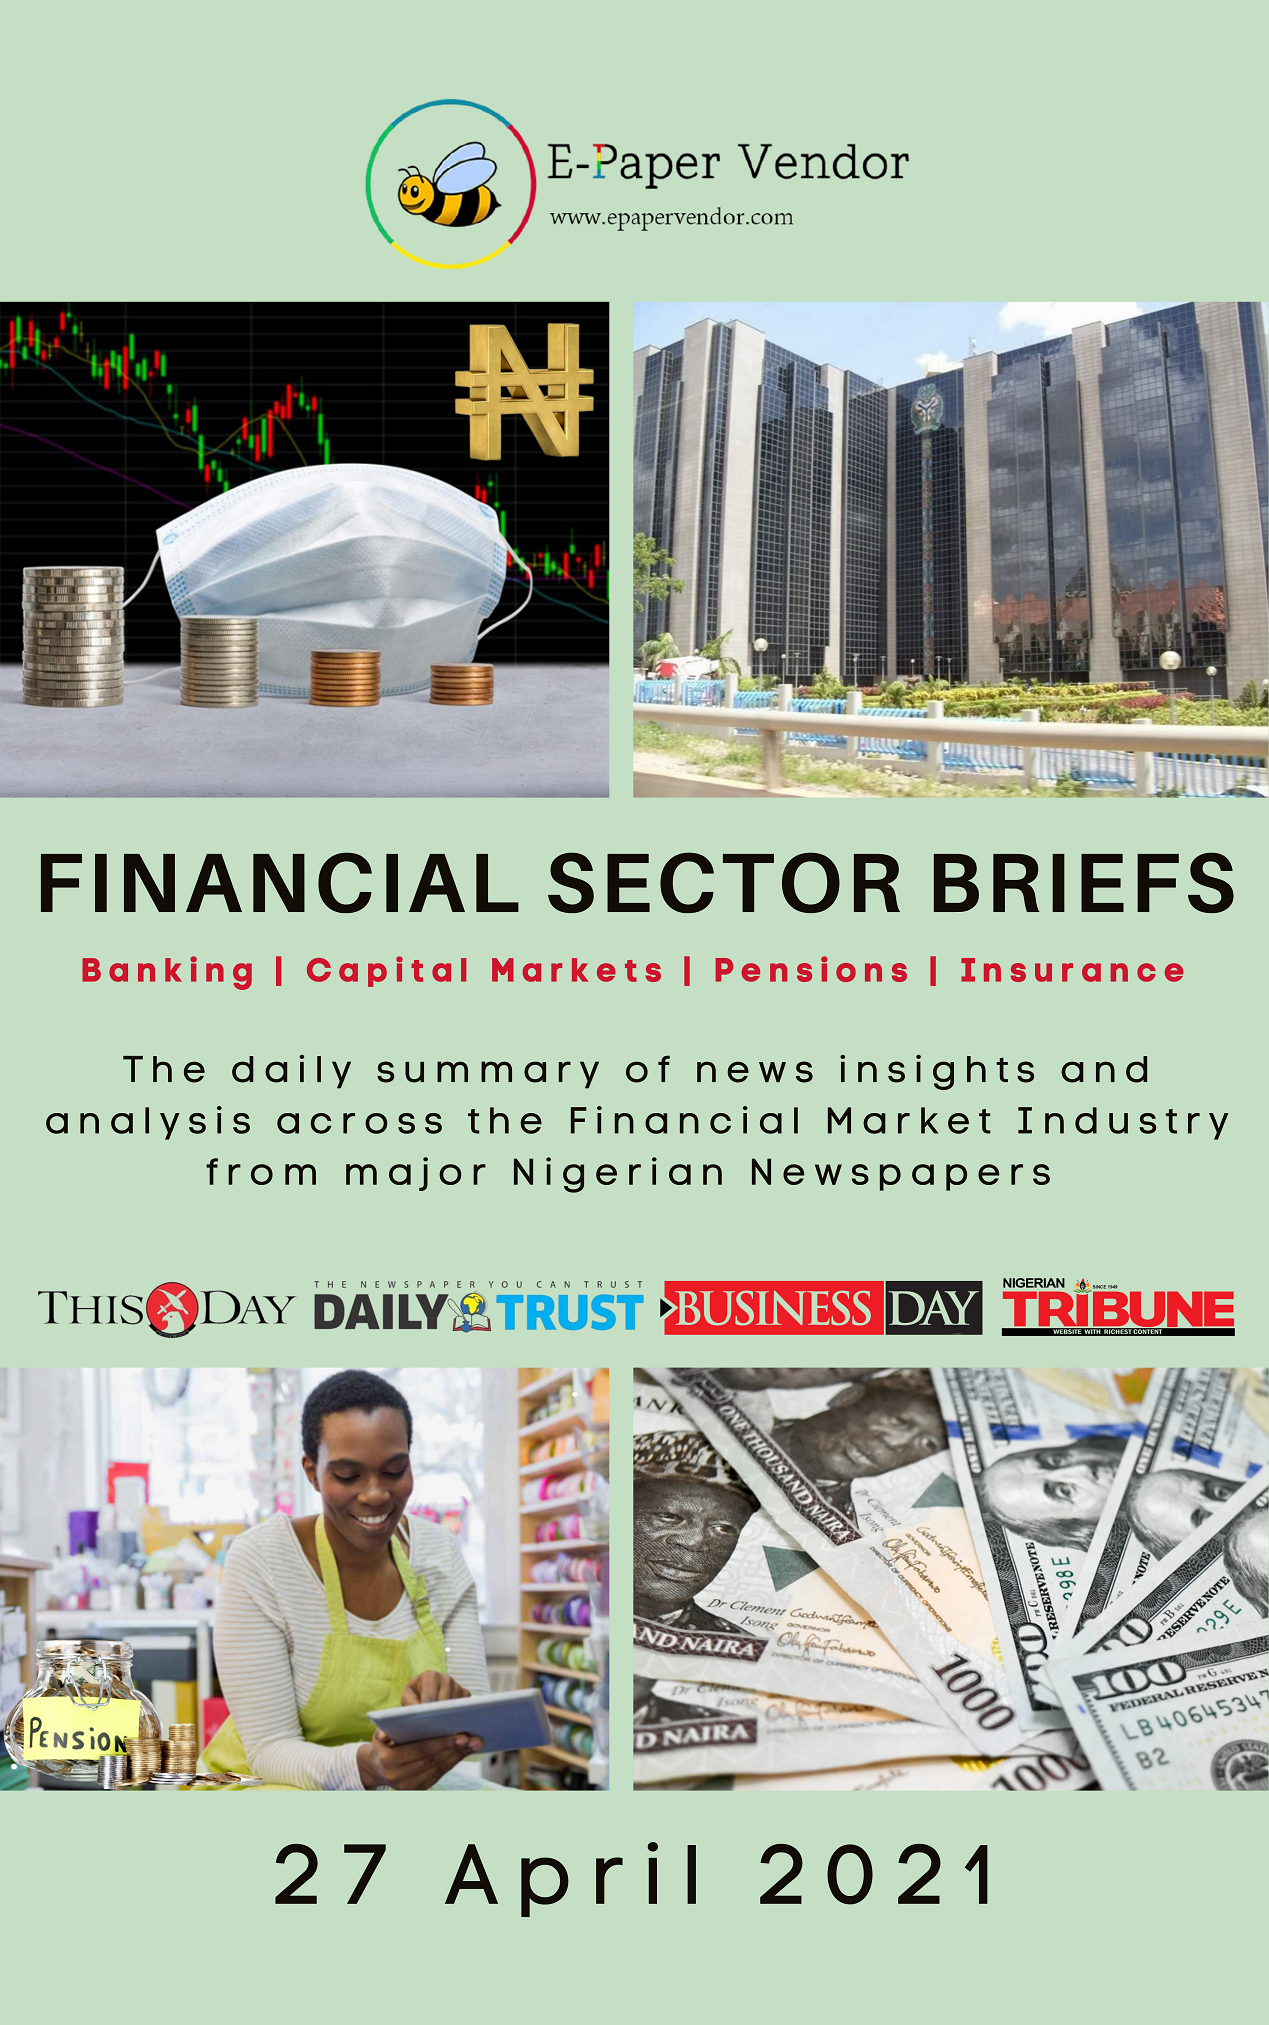 FINANCIAL SECTOR SUMMARY (27 APRIL 2021)